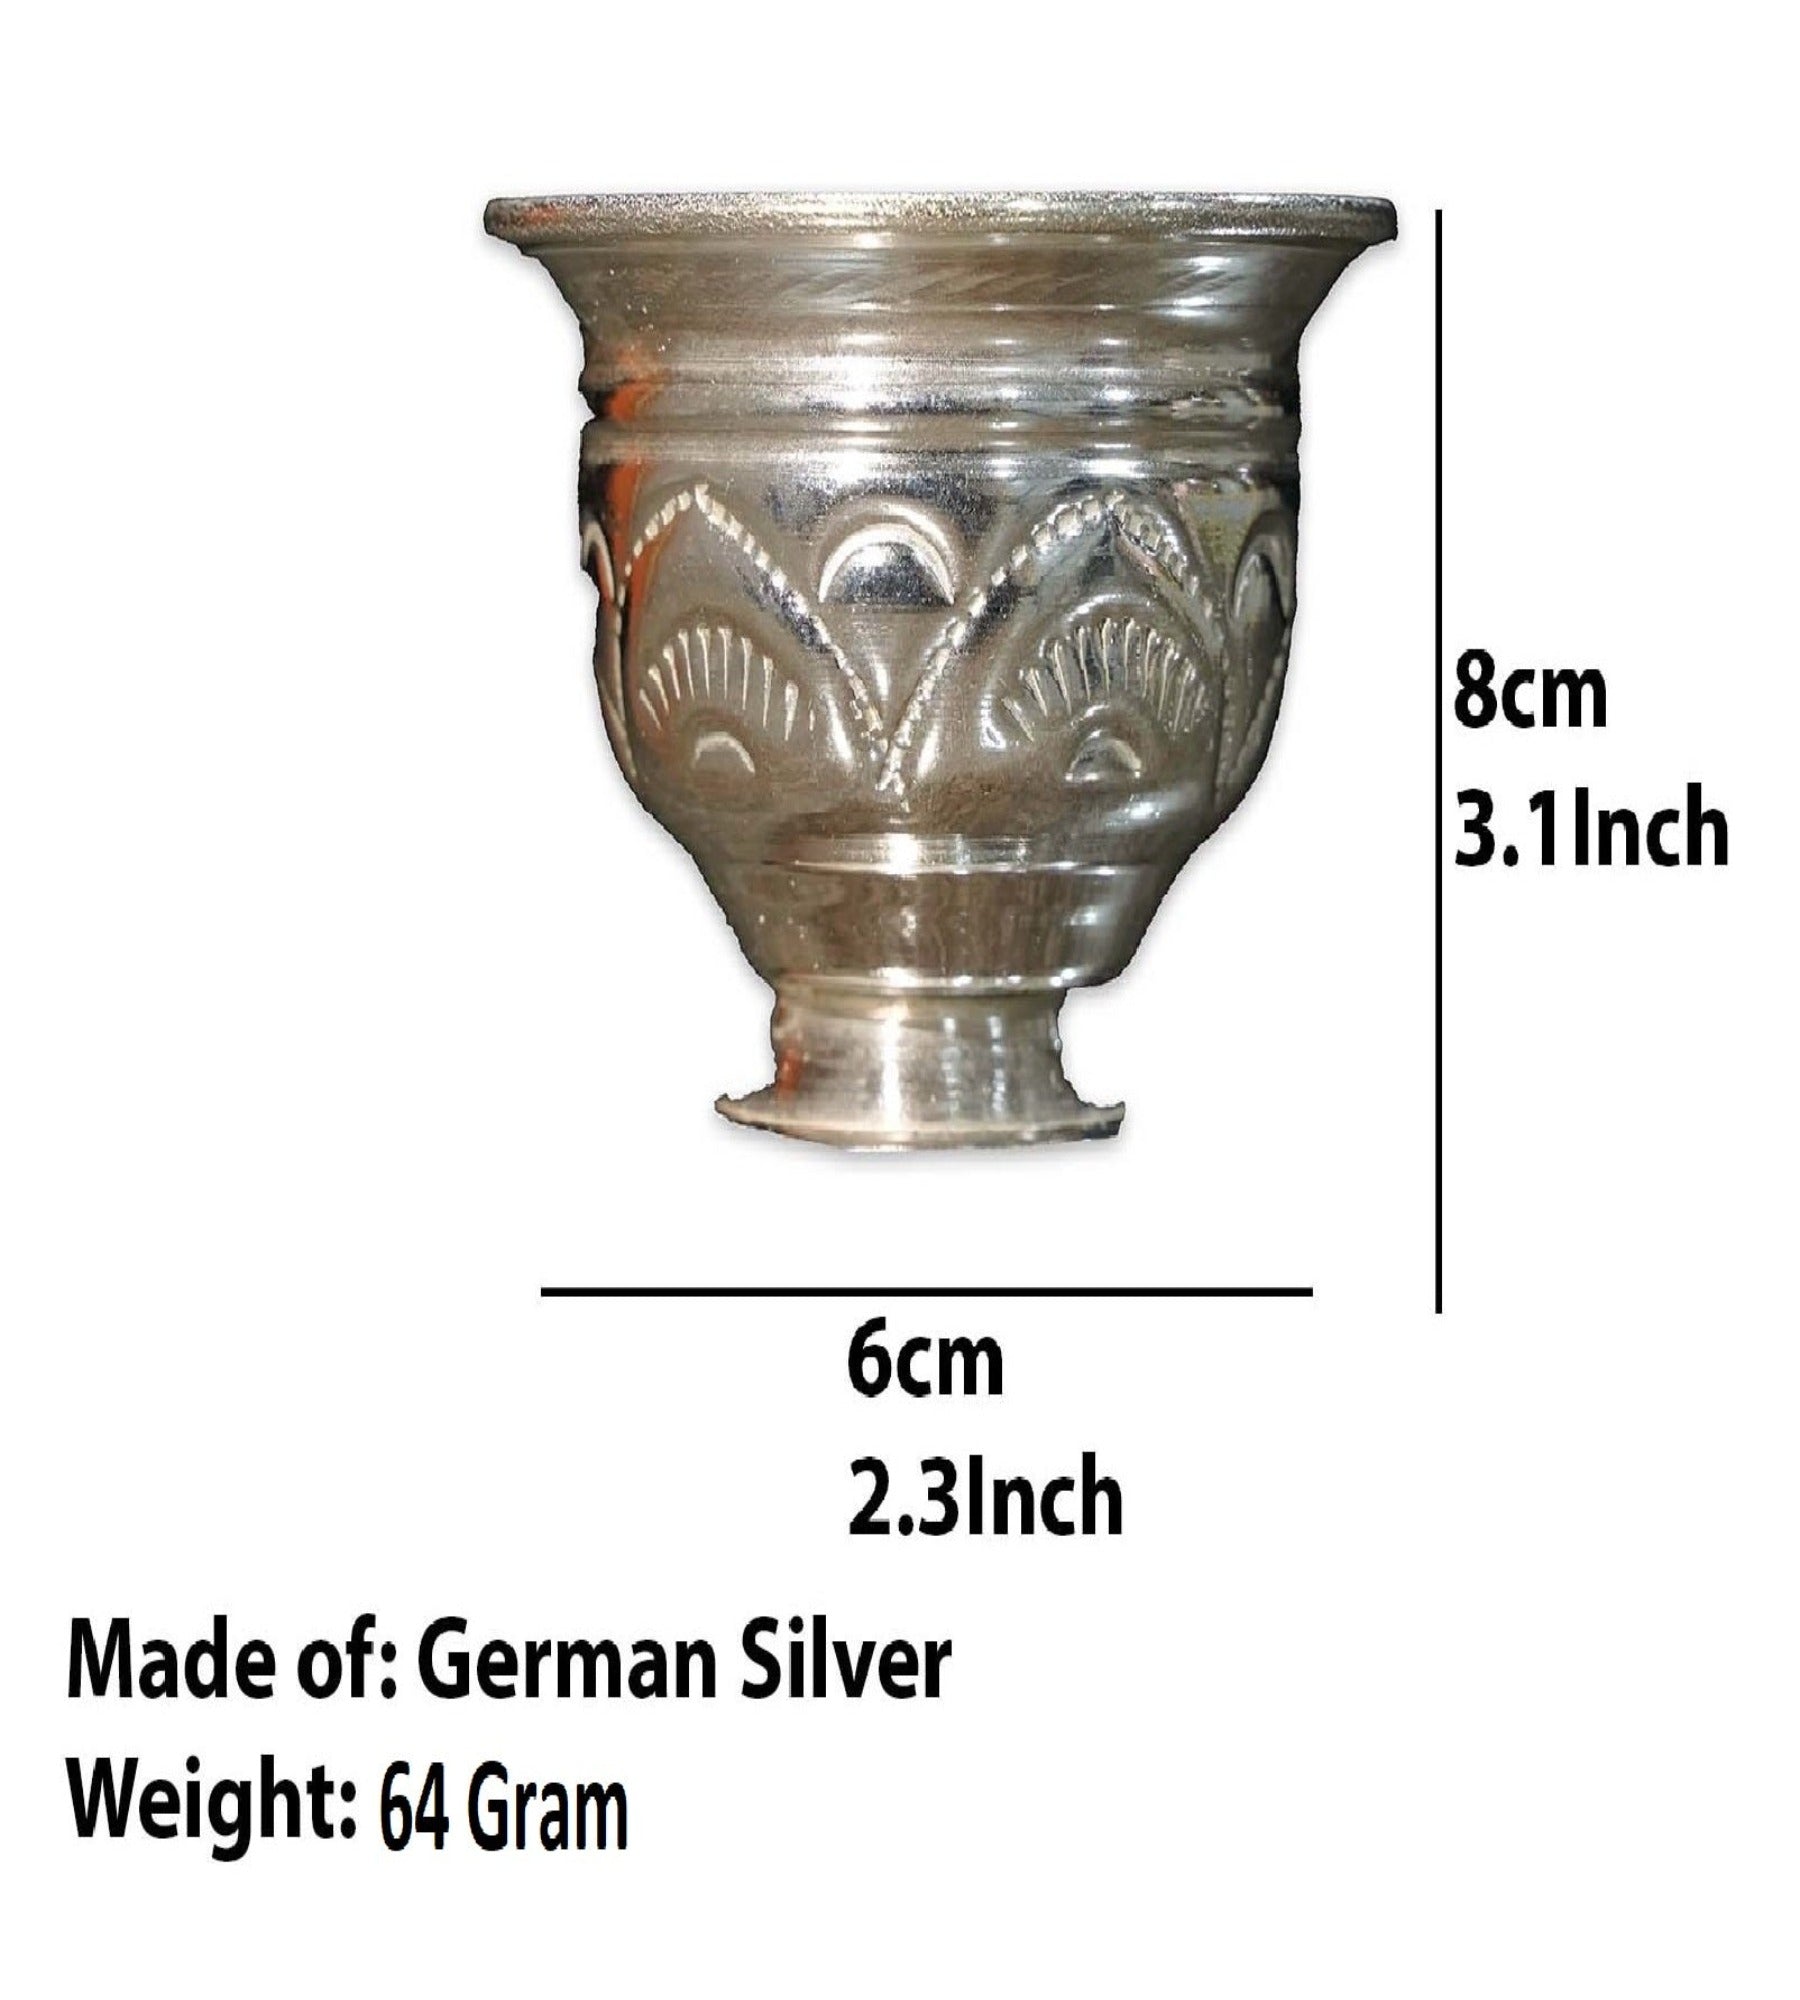 2 German Silver KumKum Barani is best for Home, Office and Temple Poojas K3116